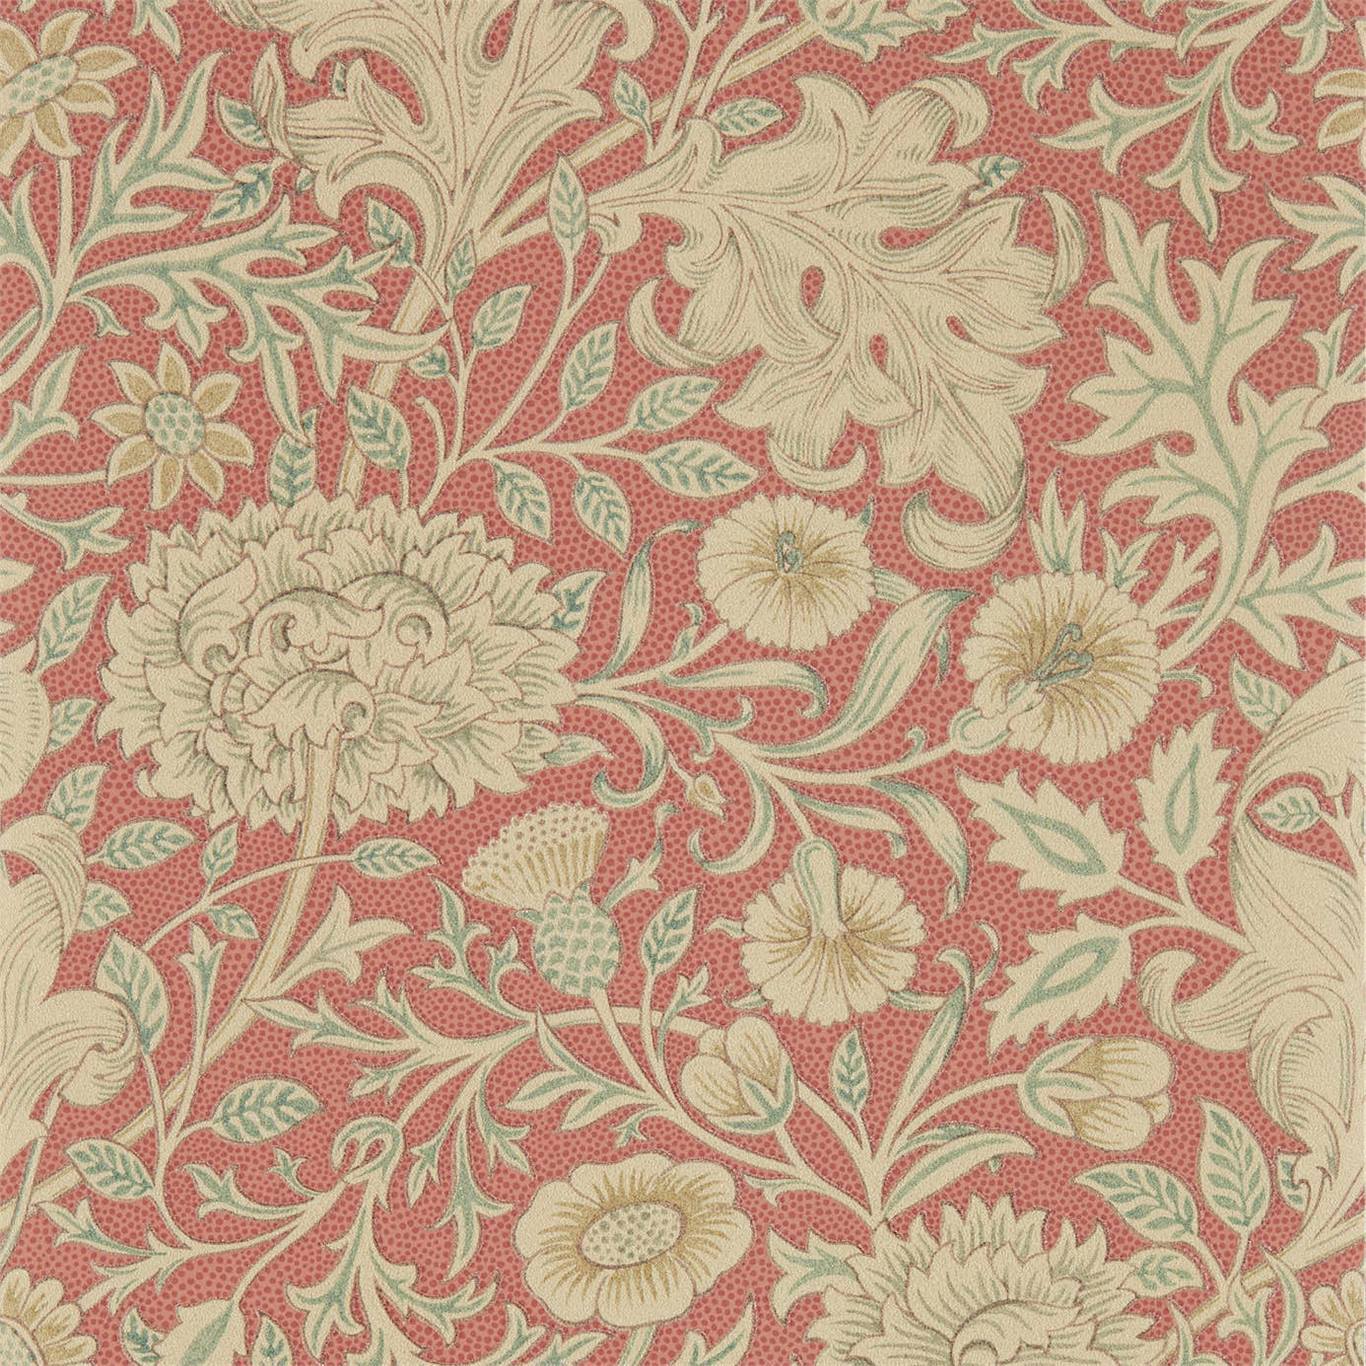 Double Bough Carmine Red Wallpaper DMSW216683 by Morris & Co